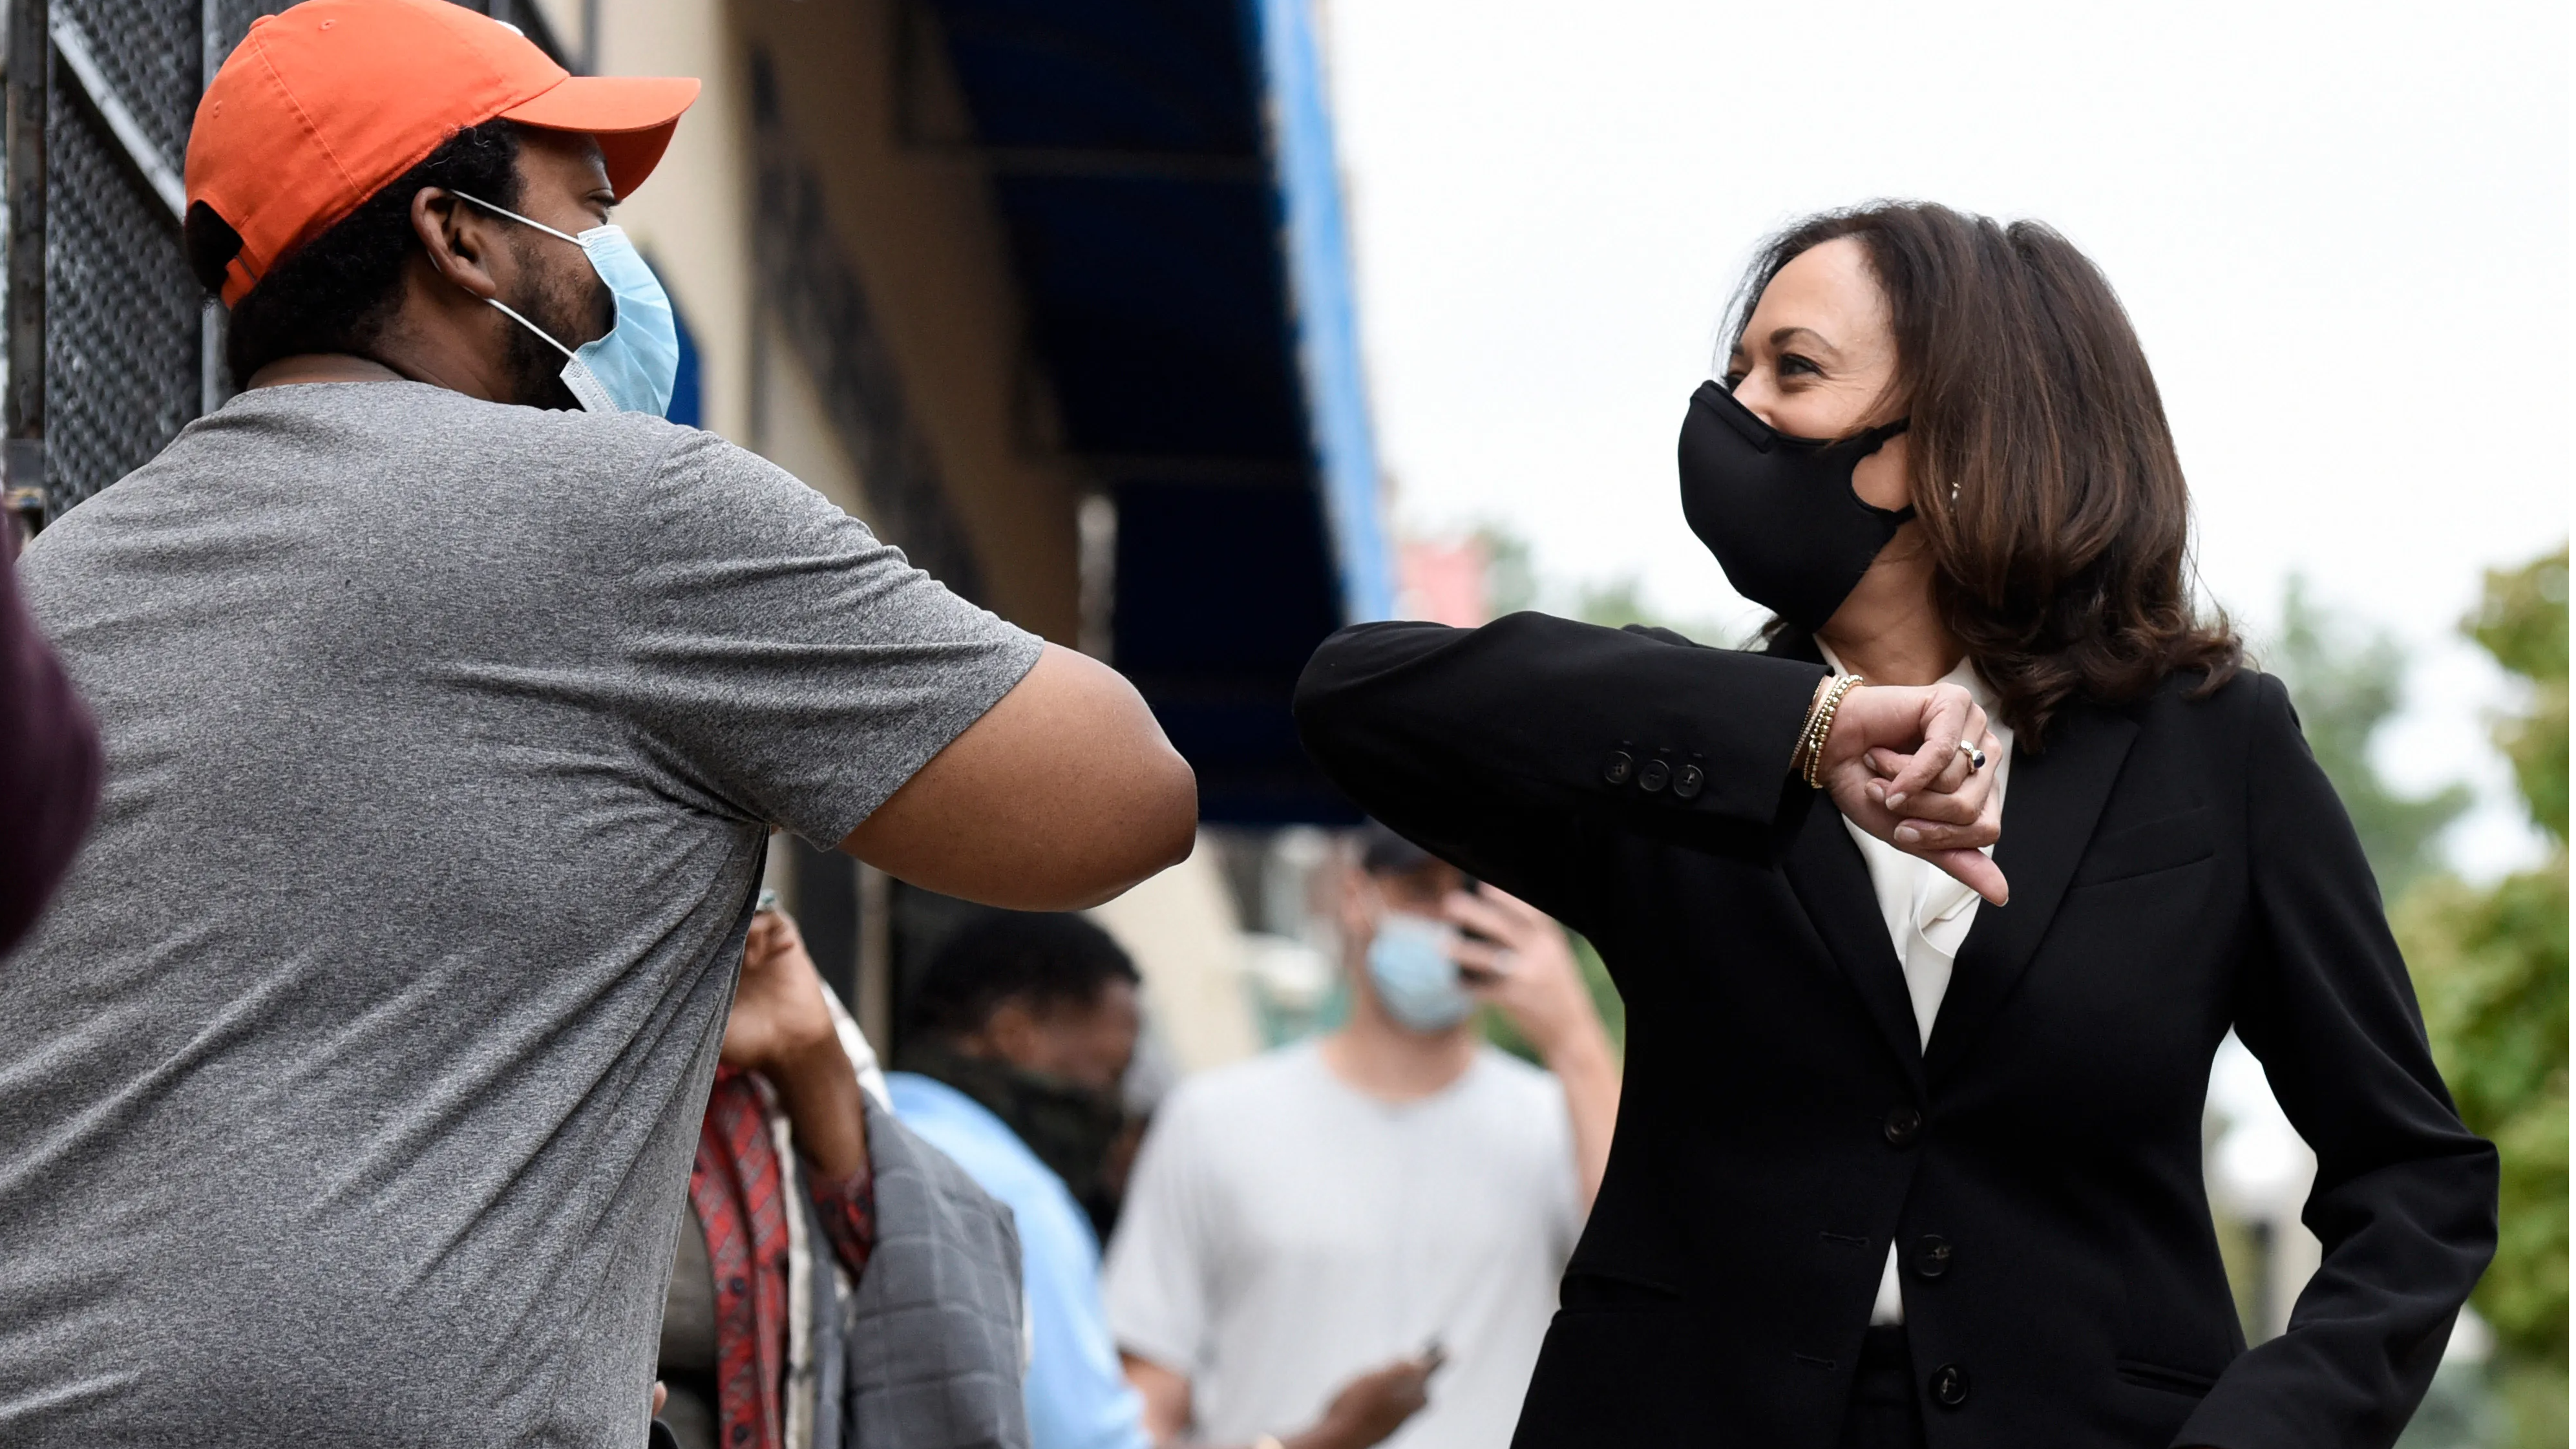 Bad cops are bad for good cops: Kamala Harris’ jibe on police brutality in the US